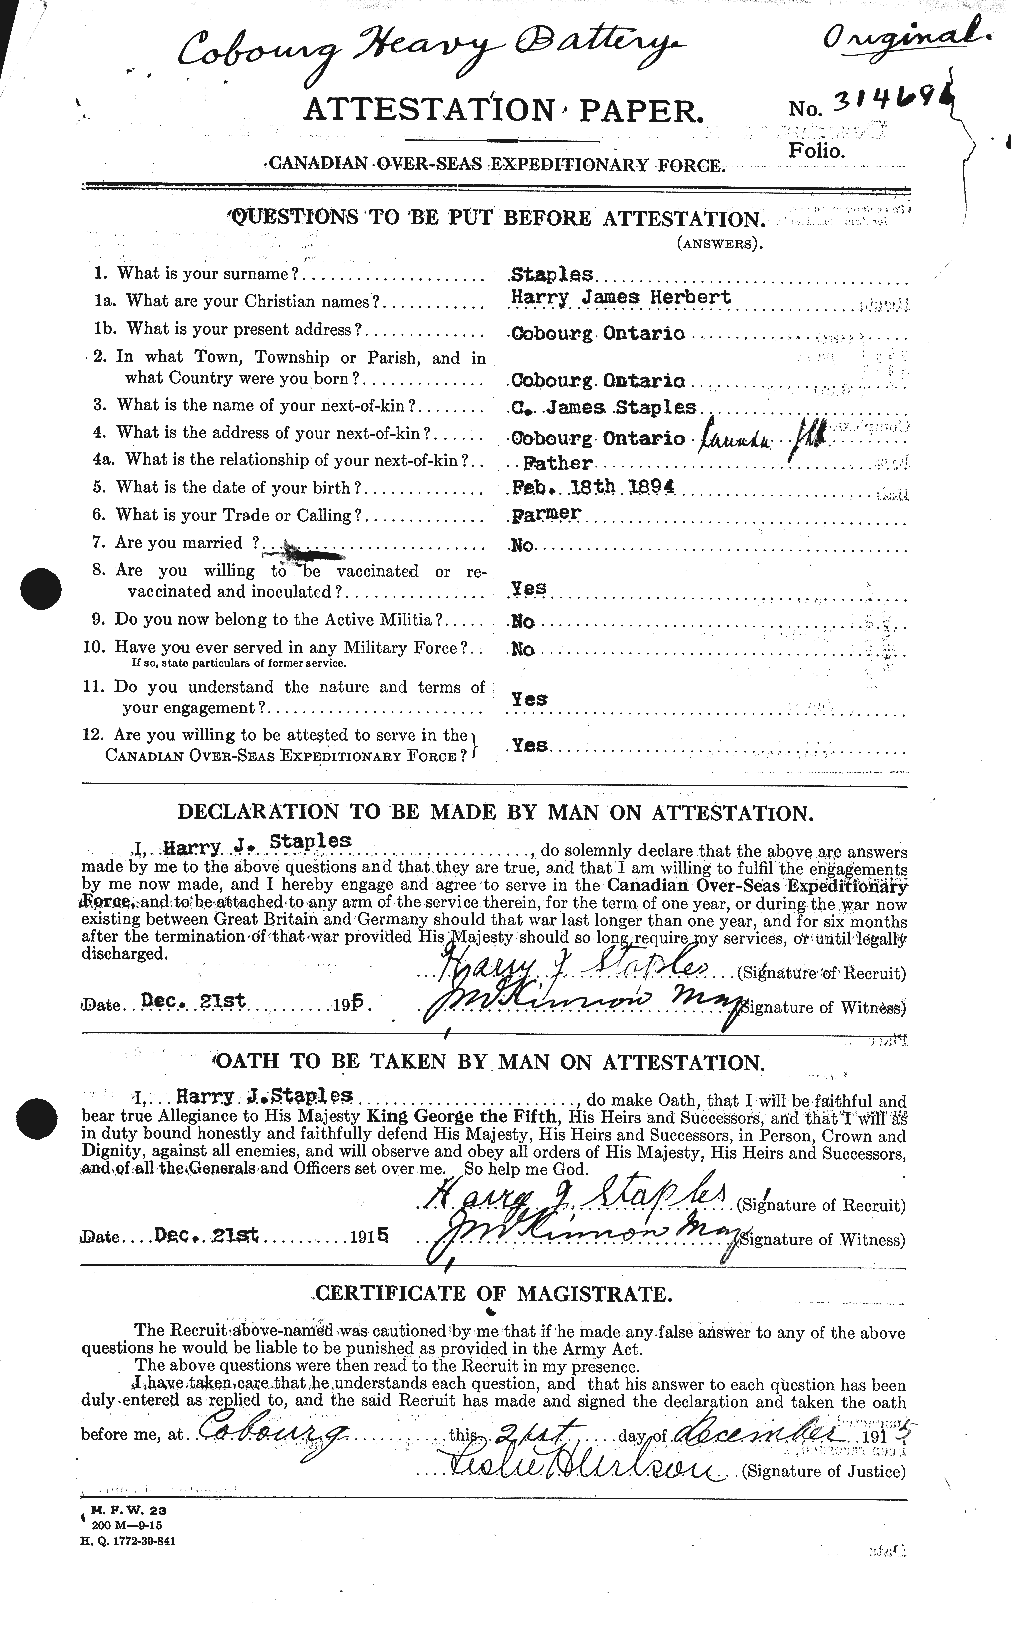 Personnel Records of the First World War - CEF 114163a